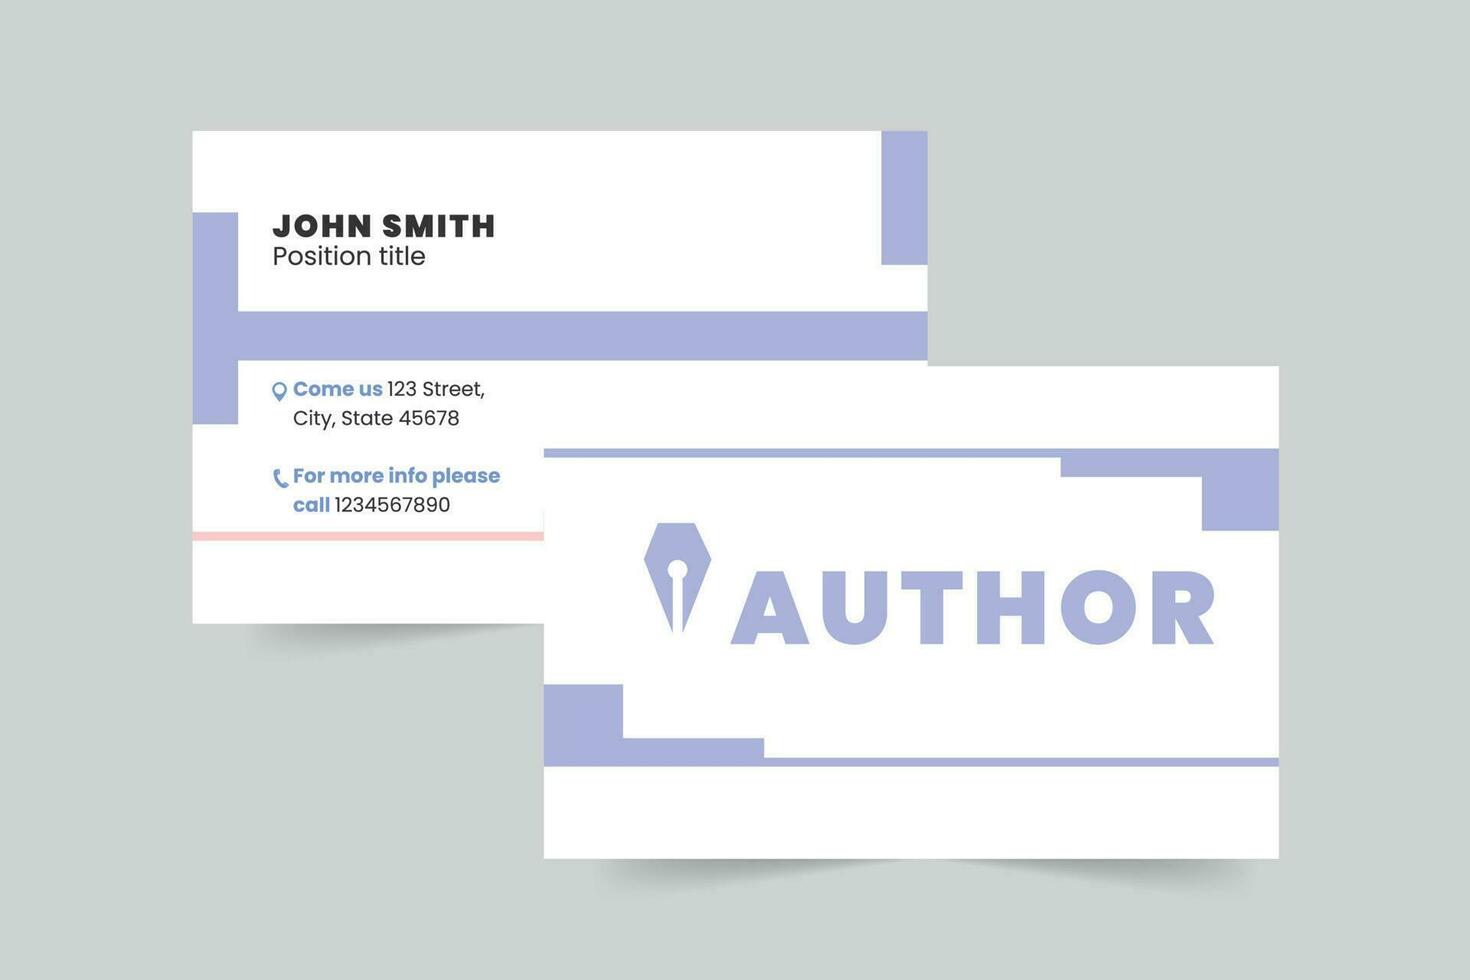 Author business card template. A clean, modern, and high-quality design business card vector design. Editable and customize template business card